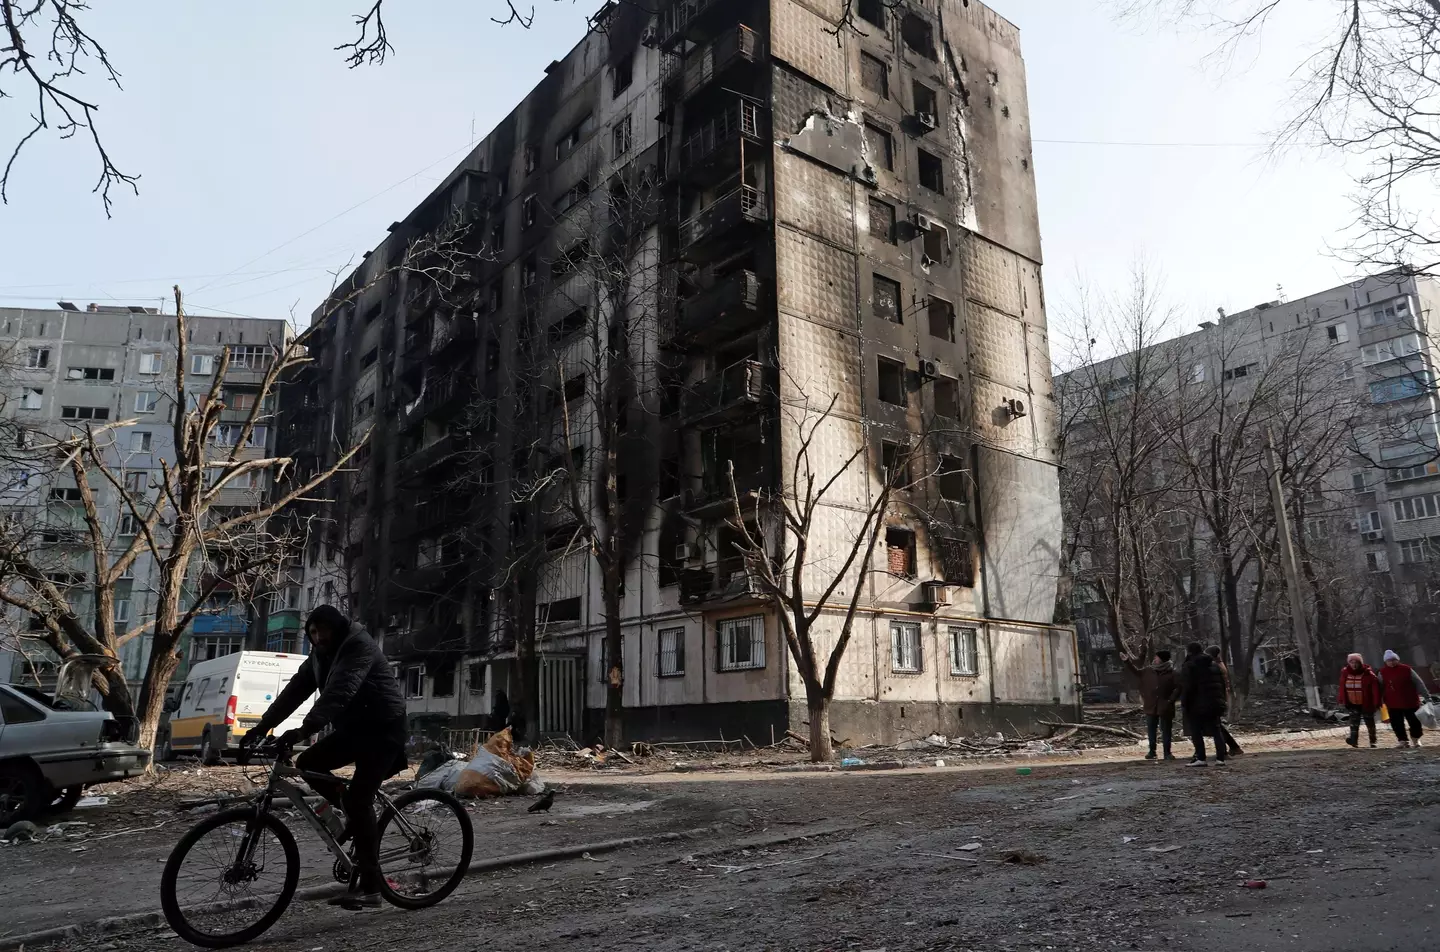 A damaged building in Mariupol.